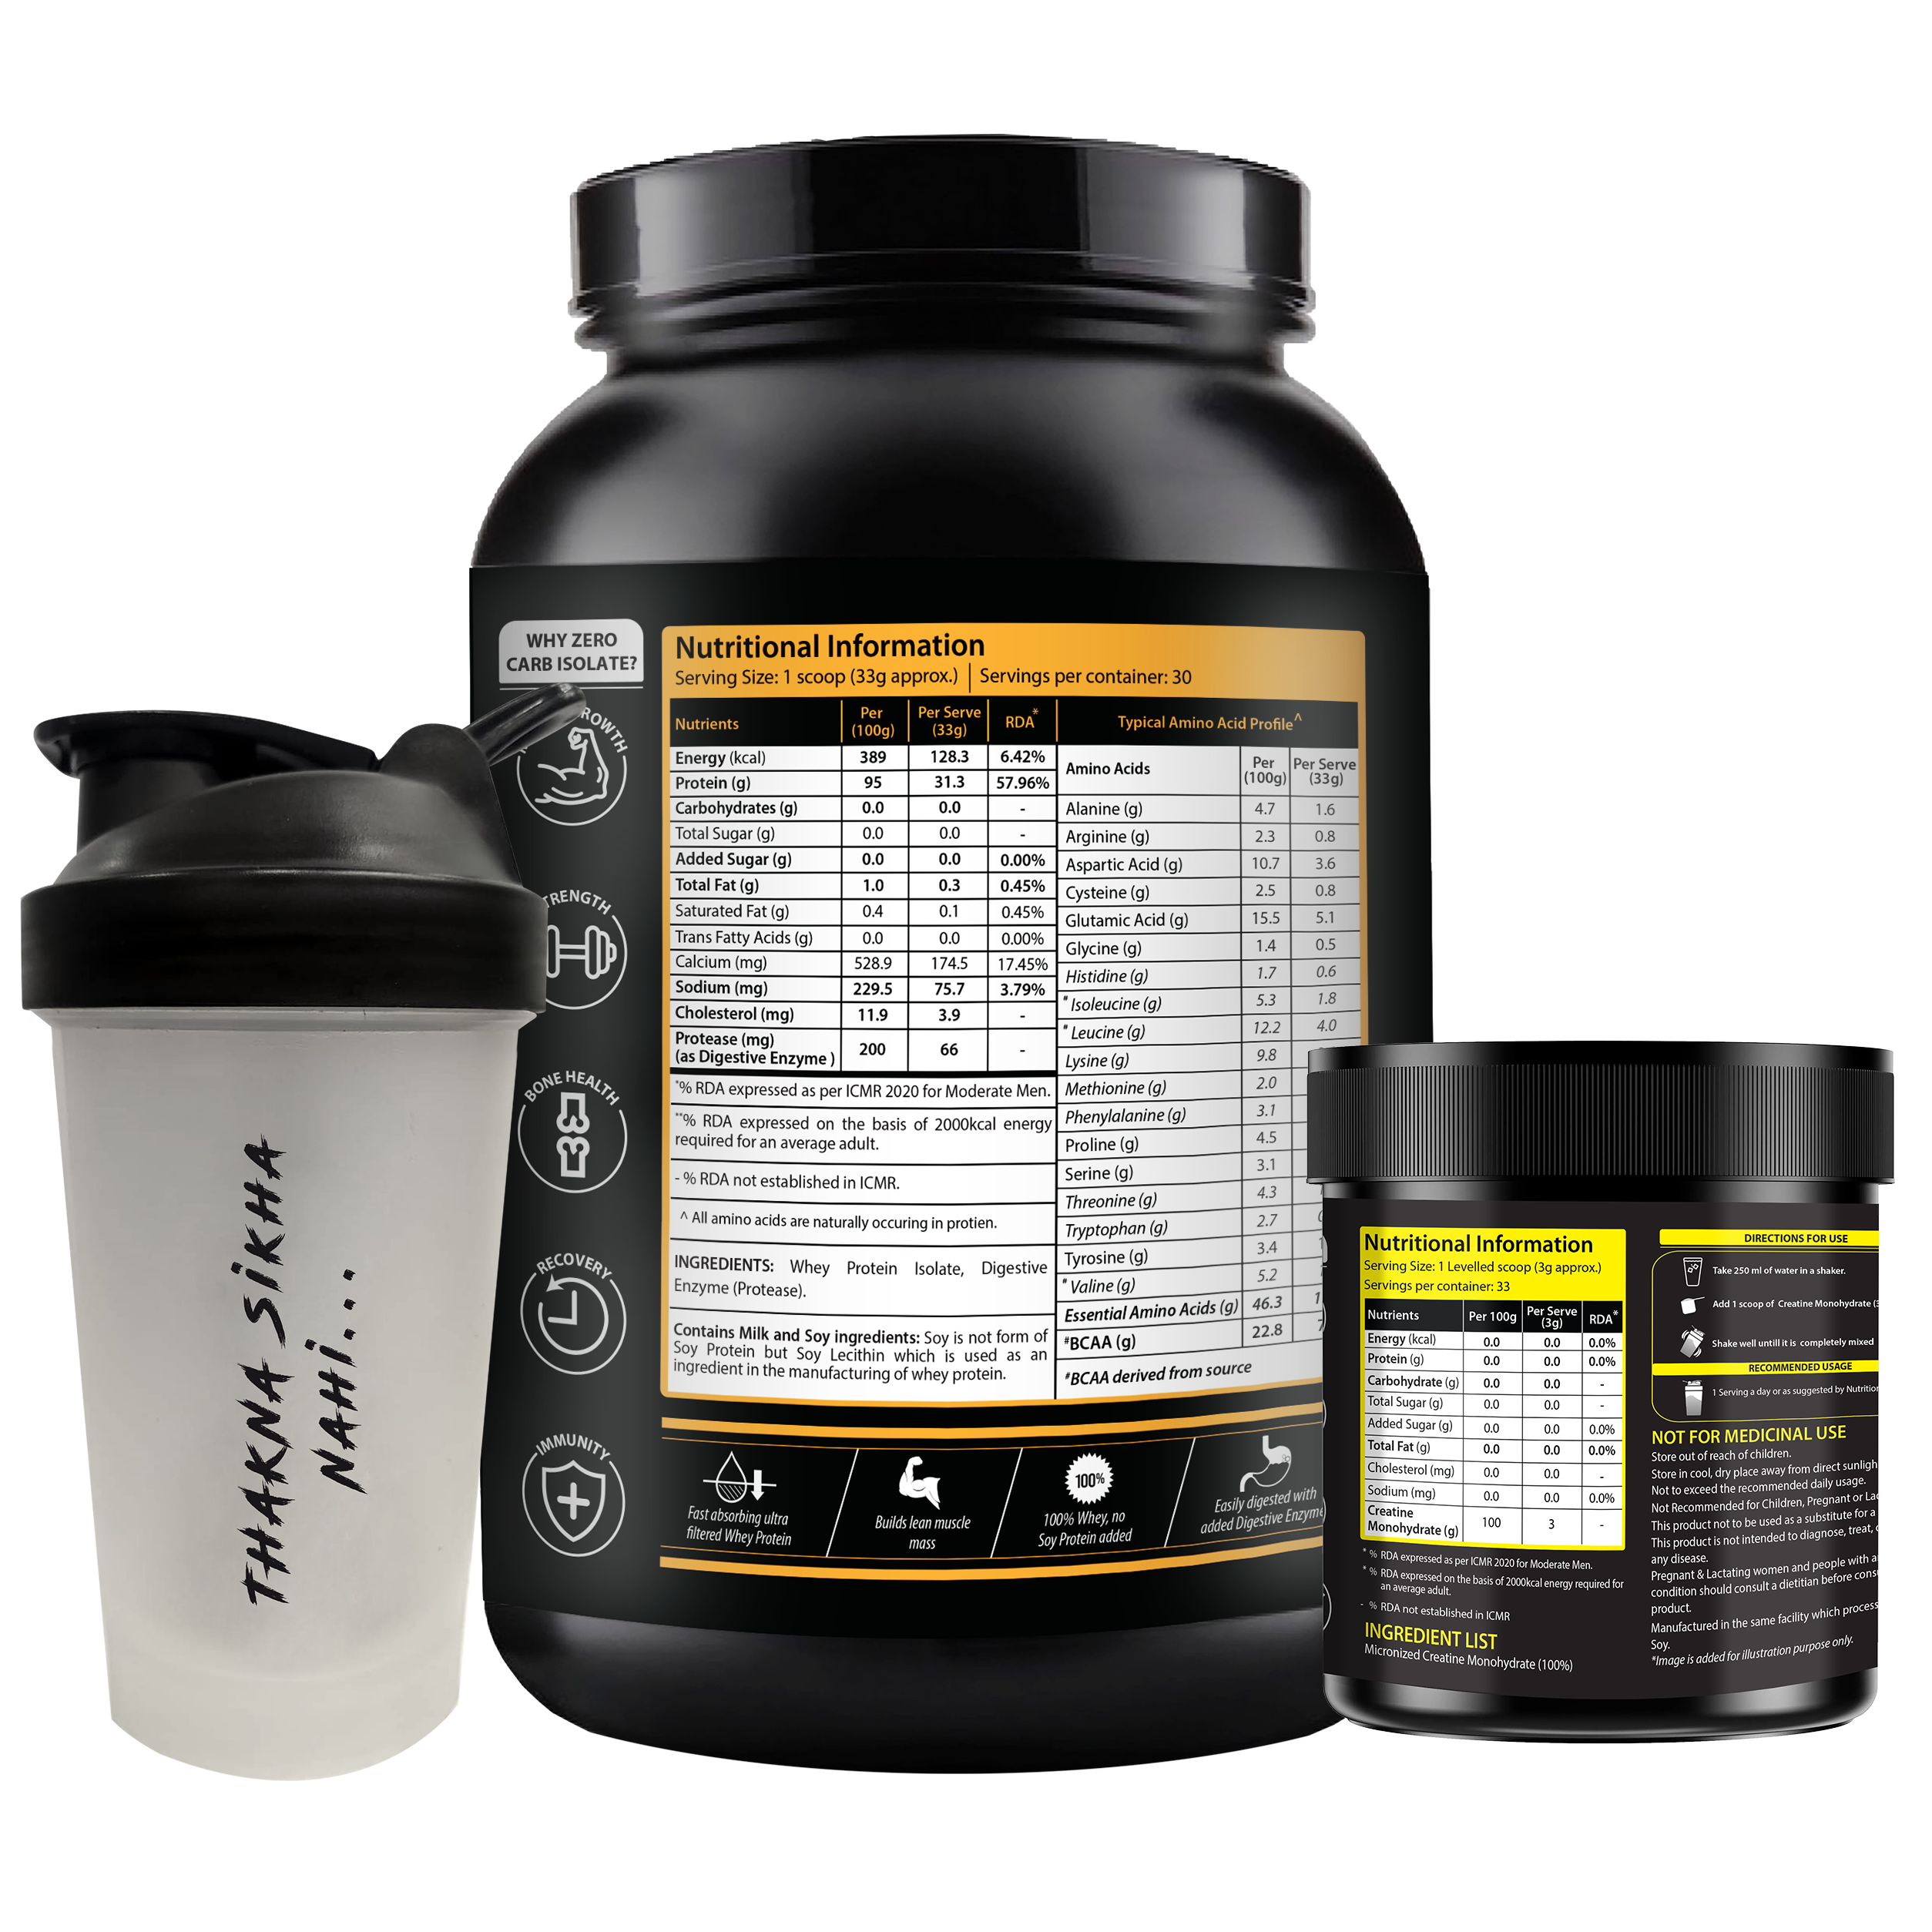 Zero Carb Isolate 95% Unflavoured 1kg + Creatine 100g + Shaker 400ml